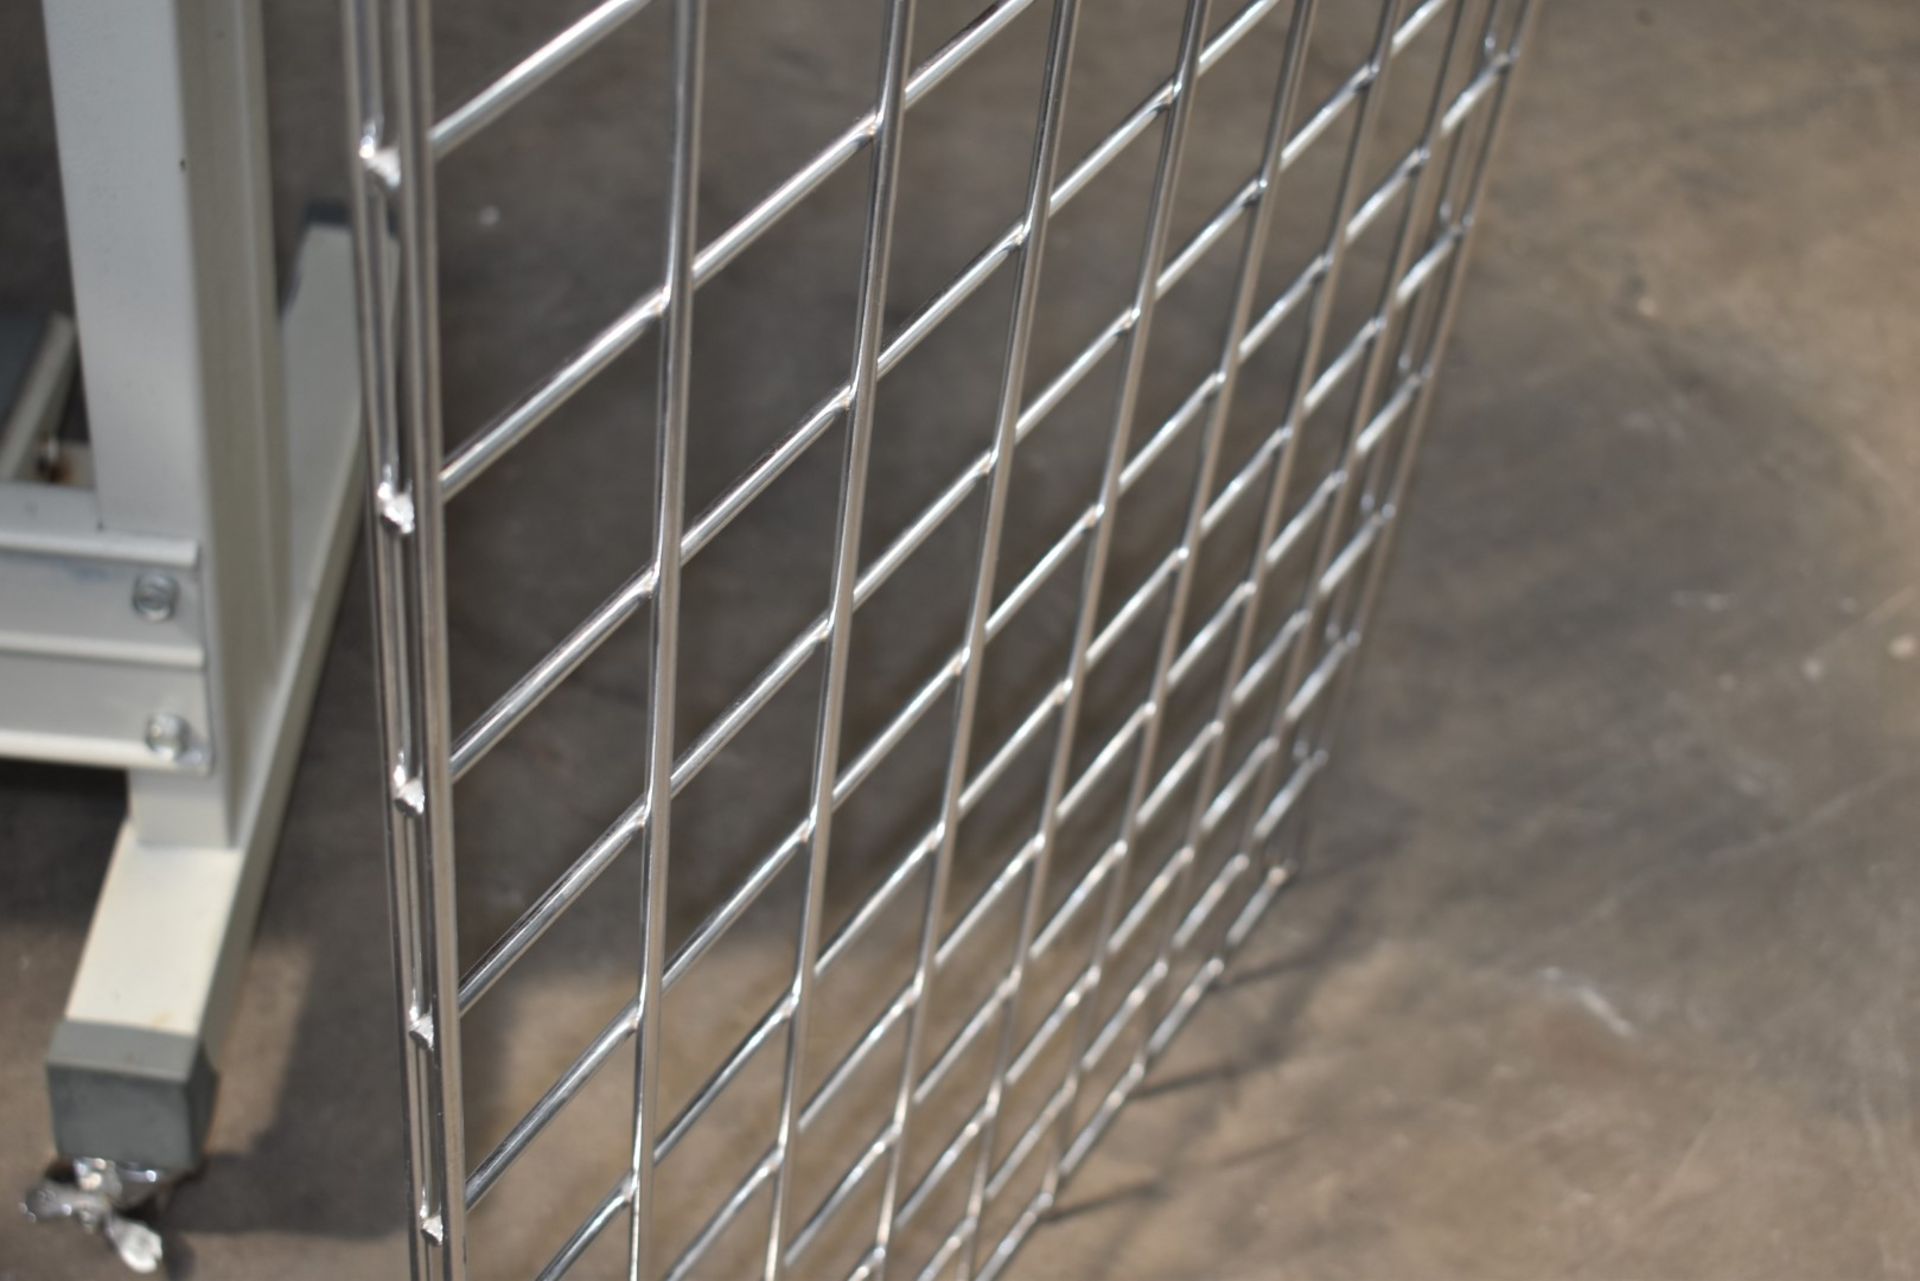 6 x Gridwall Mesh Wall Panels - Heavy Metal Construction in Chrome - Ideal For Making Security Cages - Image 8 of 8